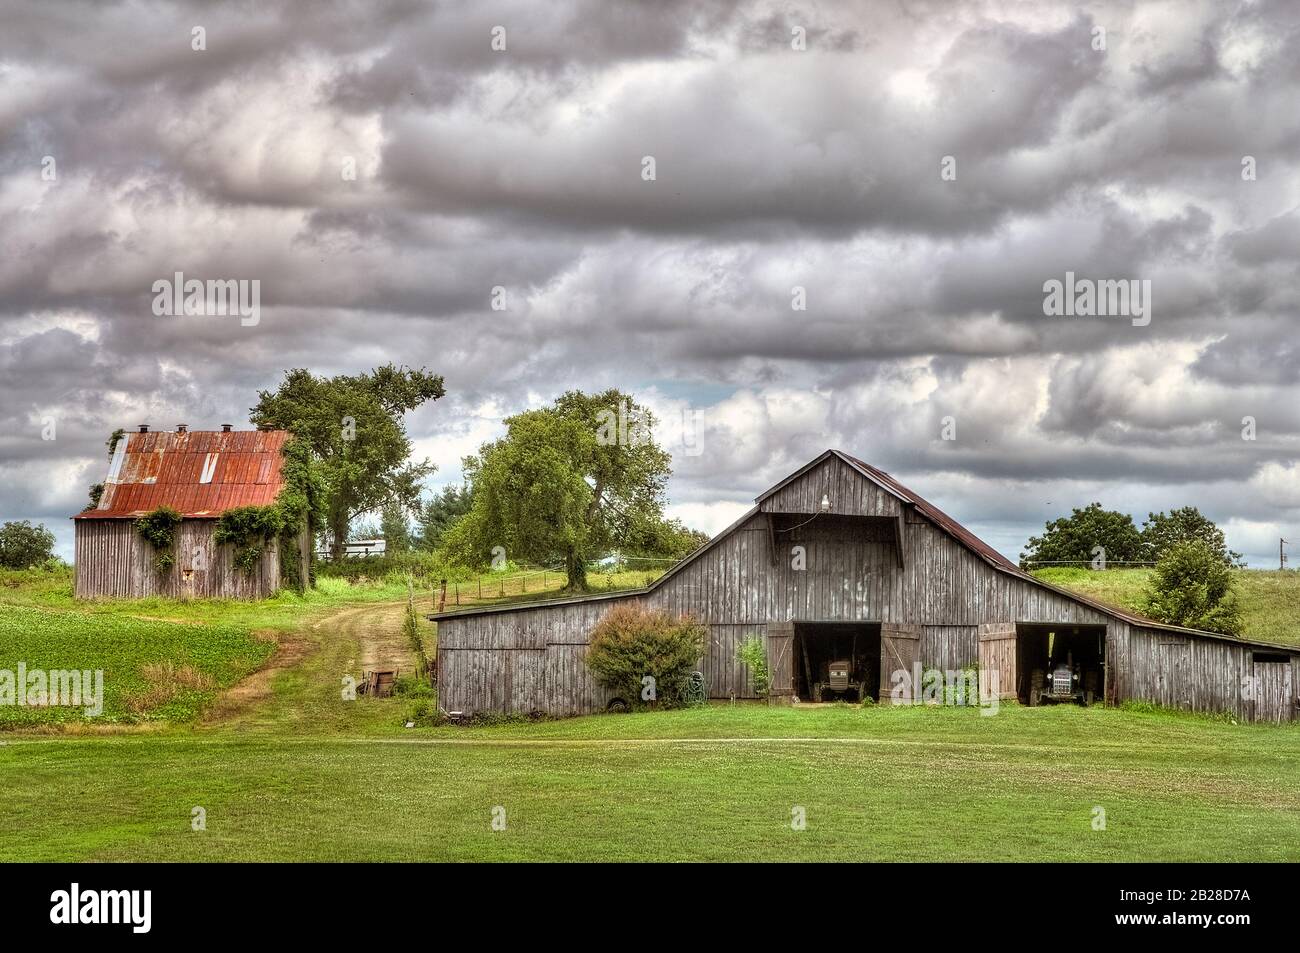 Two worn and weathered barns sit with their open doors and resting tractors under a cloudy and dynamic sky Stock Photo